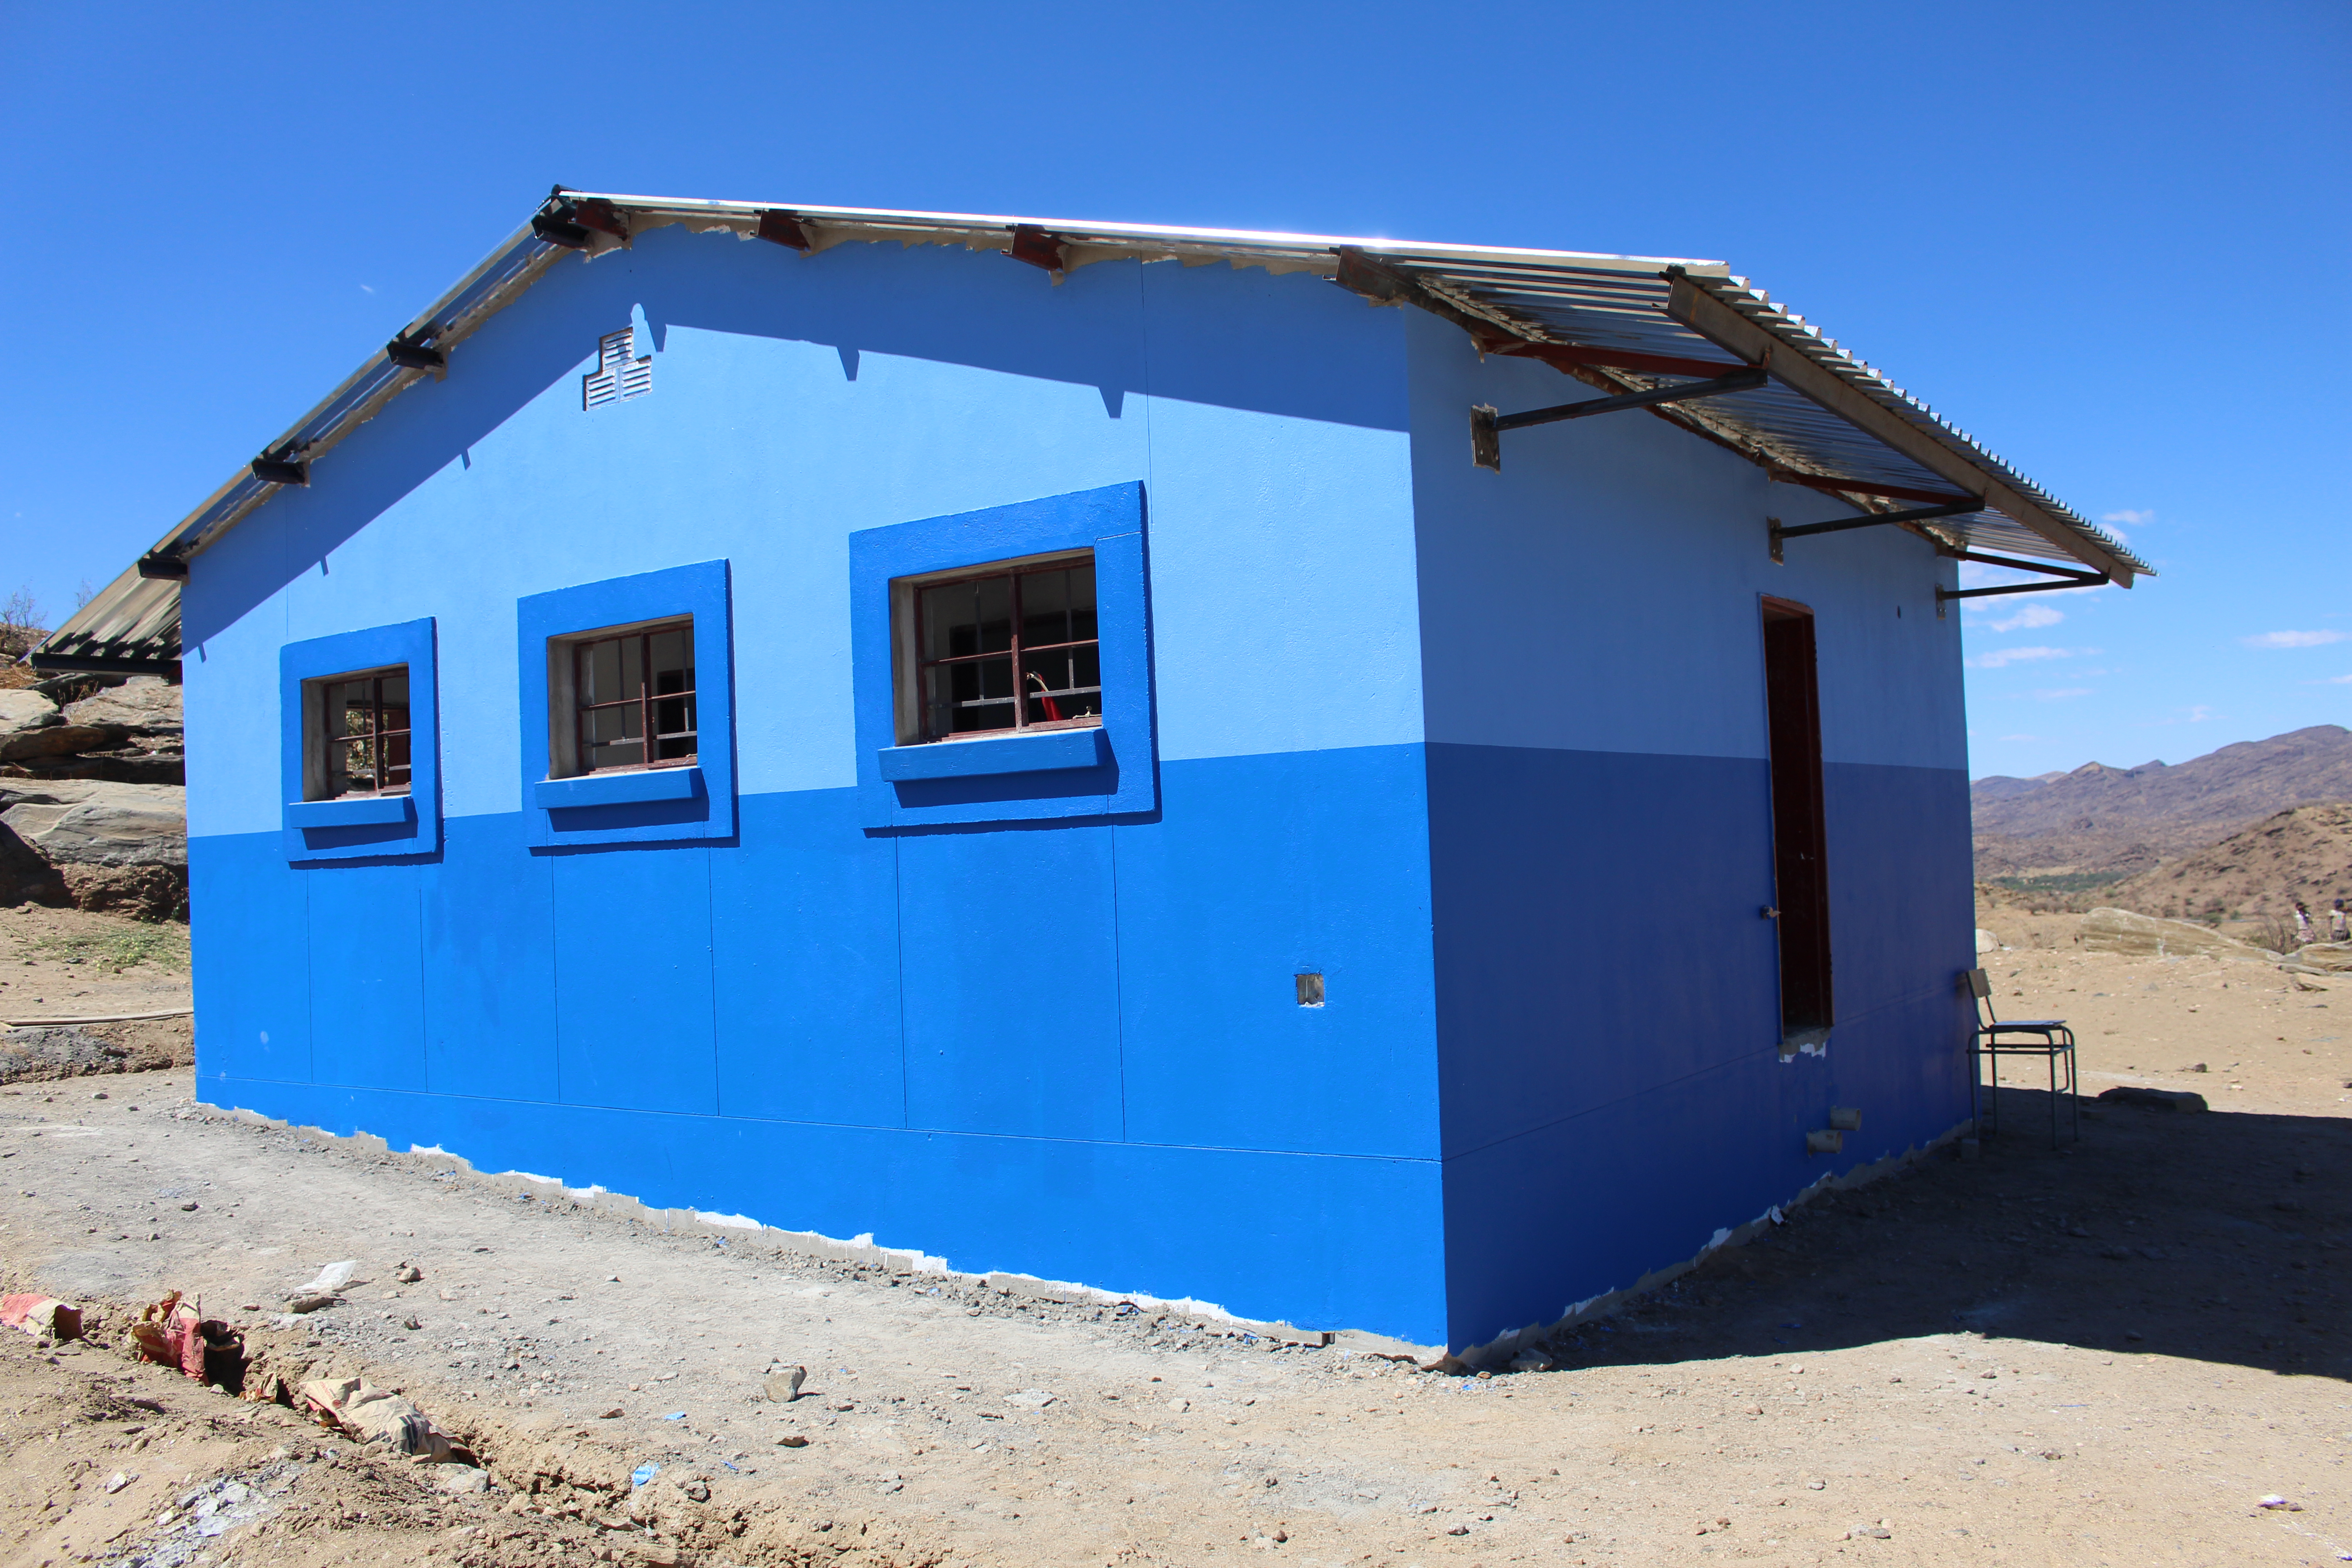 OVTC Projects in the Khomas region almost complete